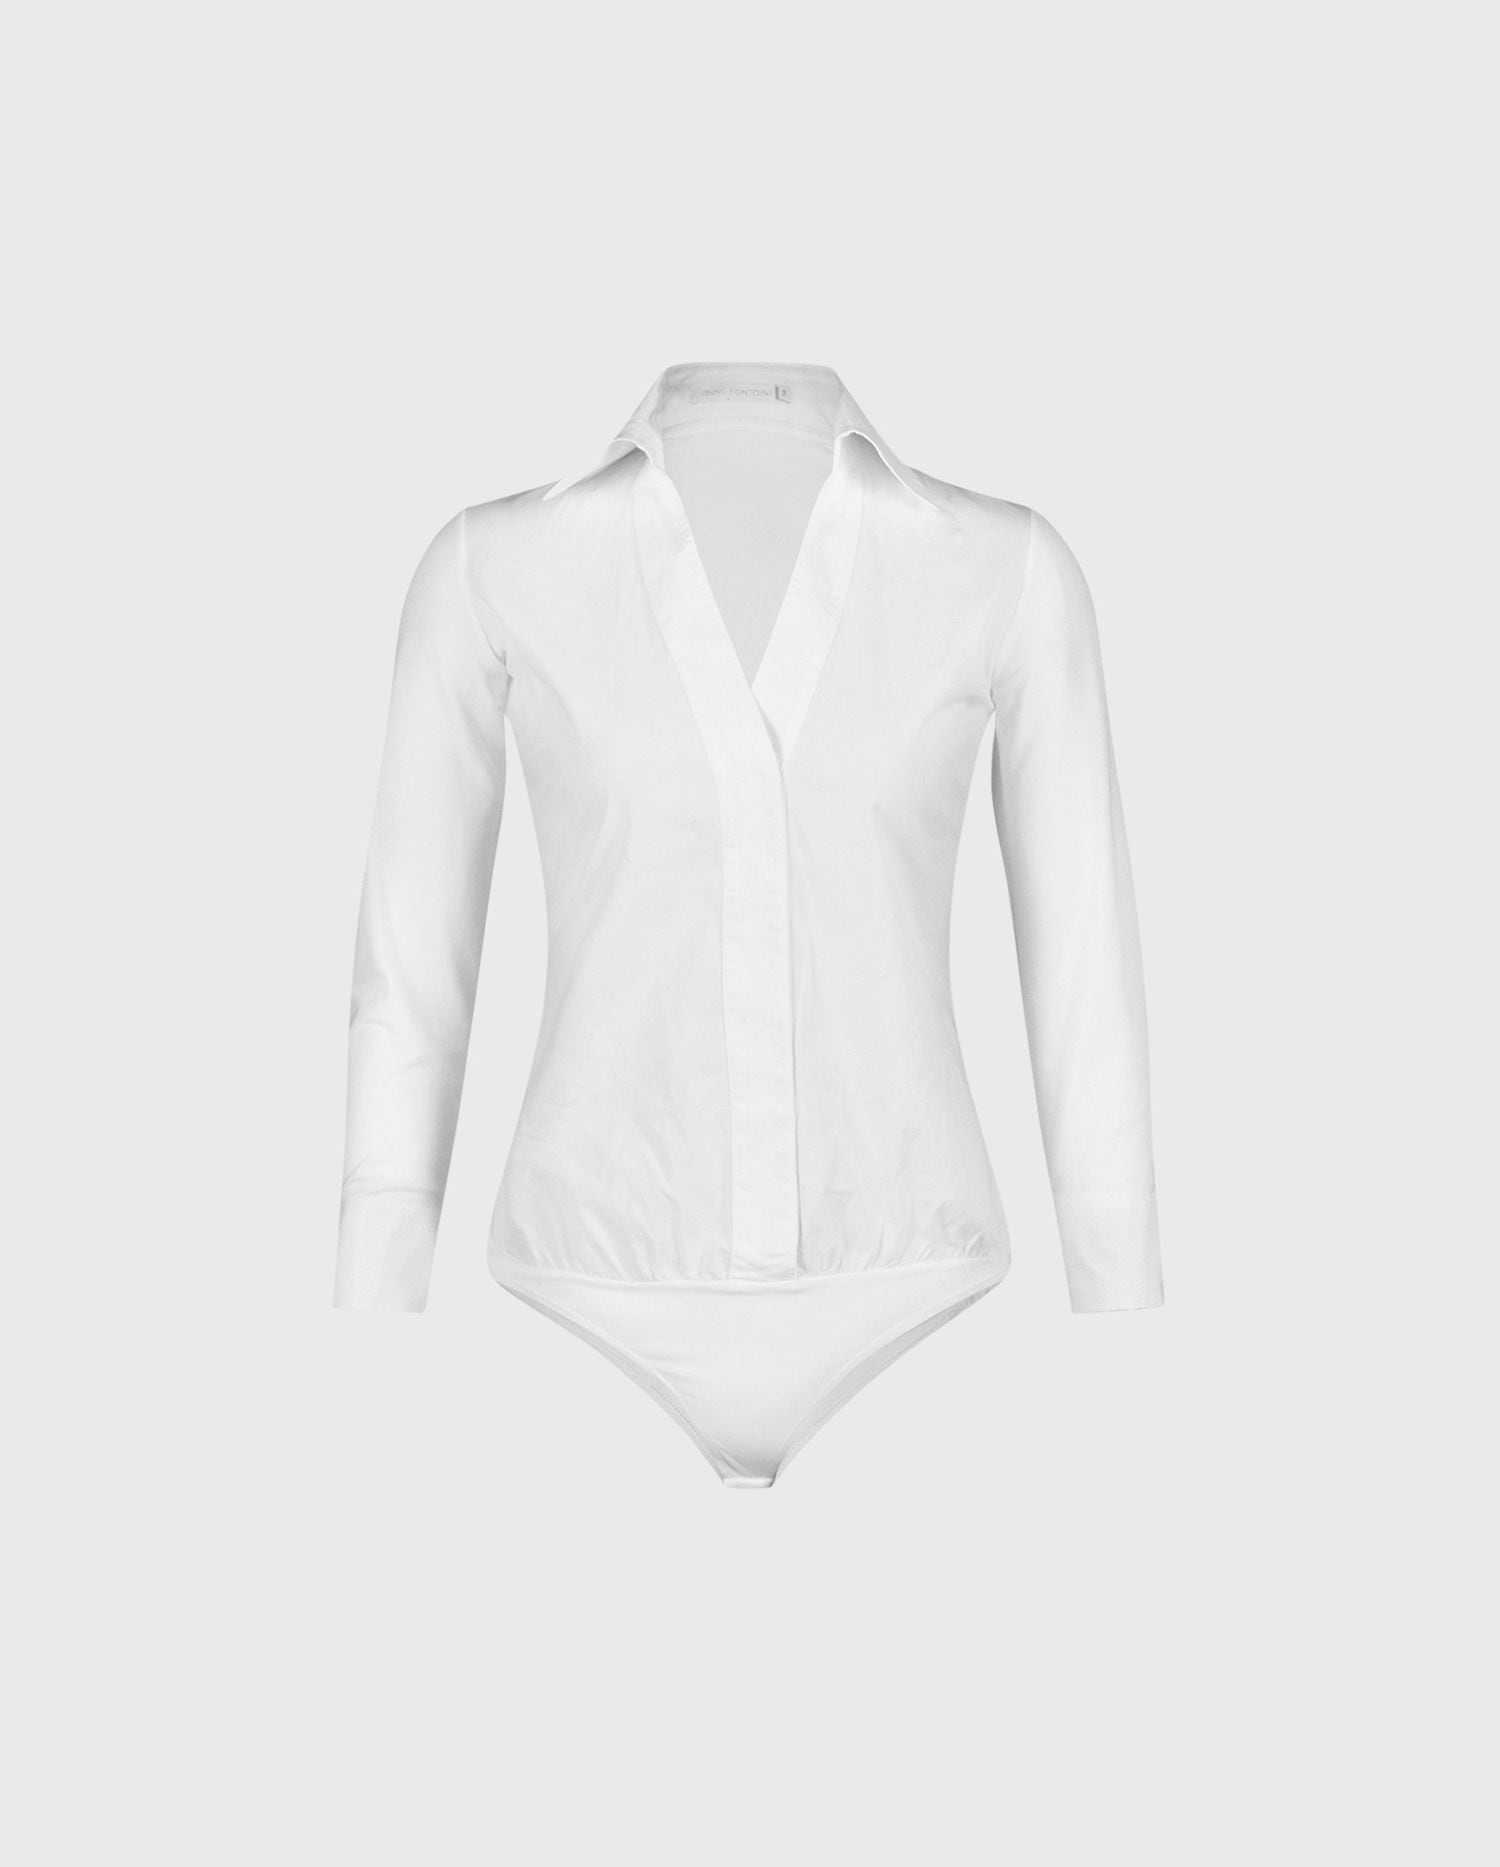 The VERENE white bodysuit with a collar is the perfect base to add to your effortless chic styling.